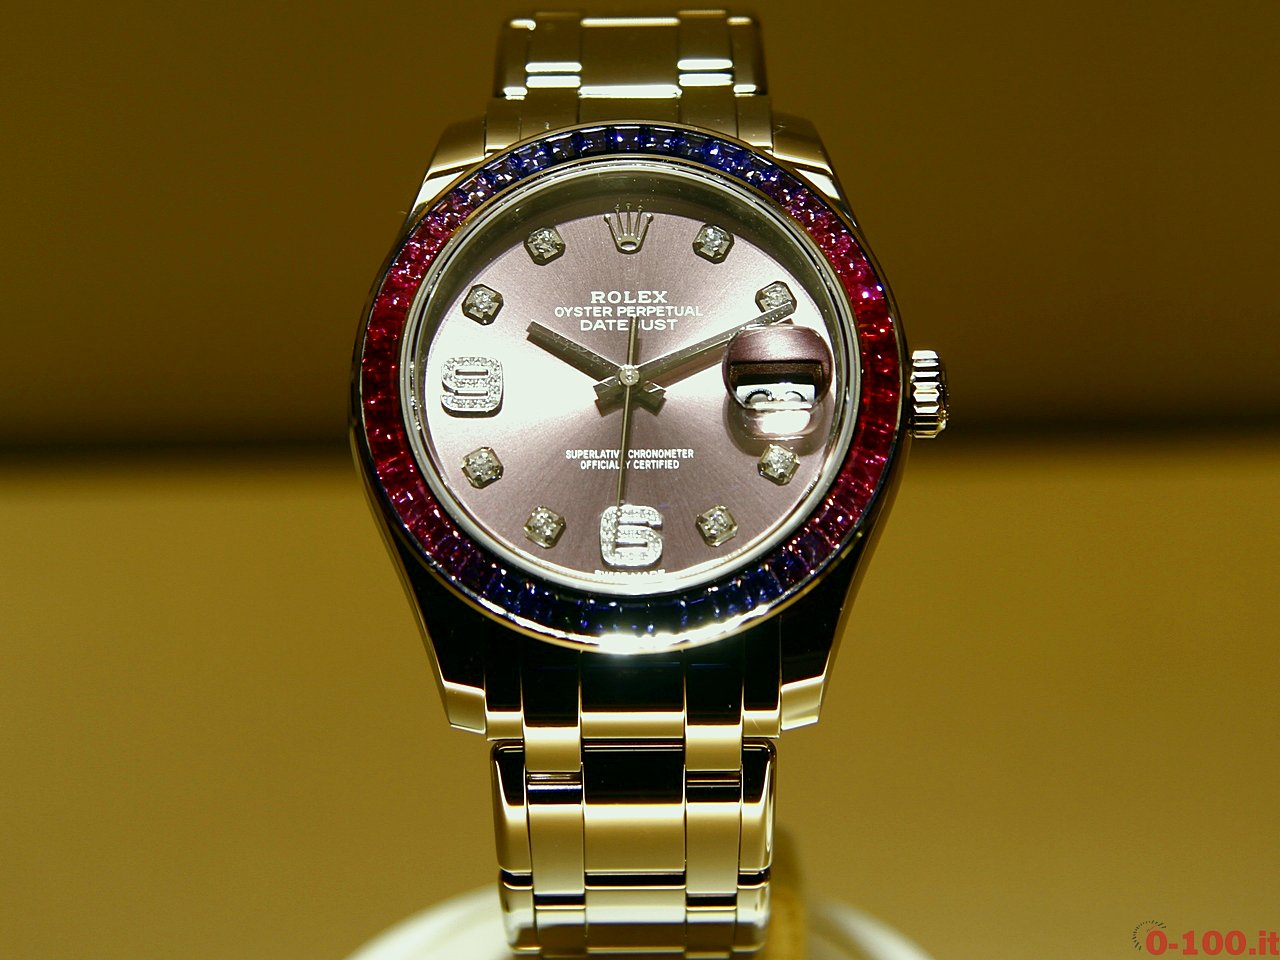 baselworld-2015_rolex-datejust-pearlmaster-39-0-100_5